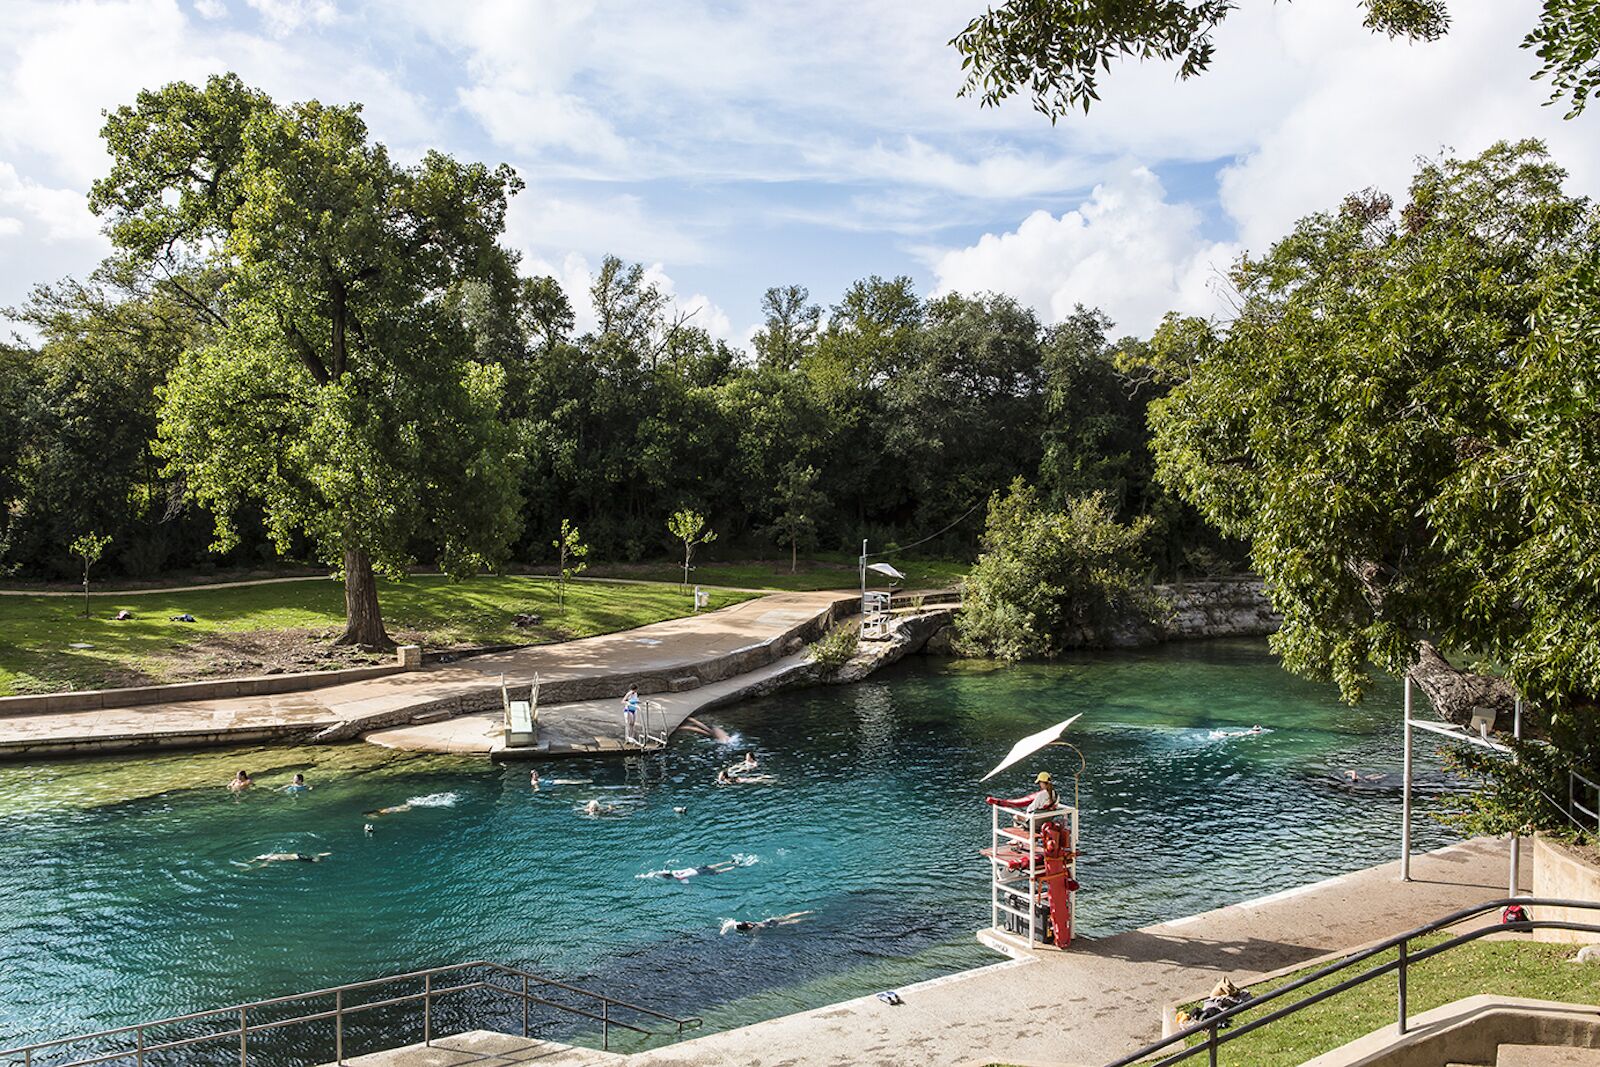 Things to do in Austin include swimming in Barton Springs